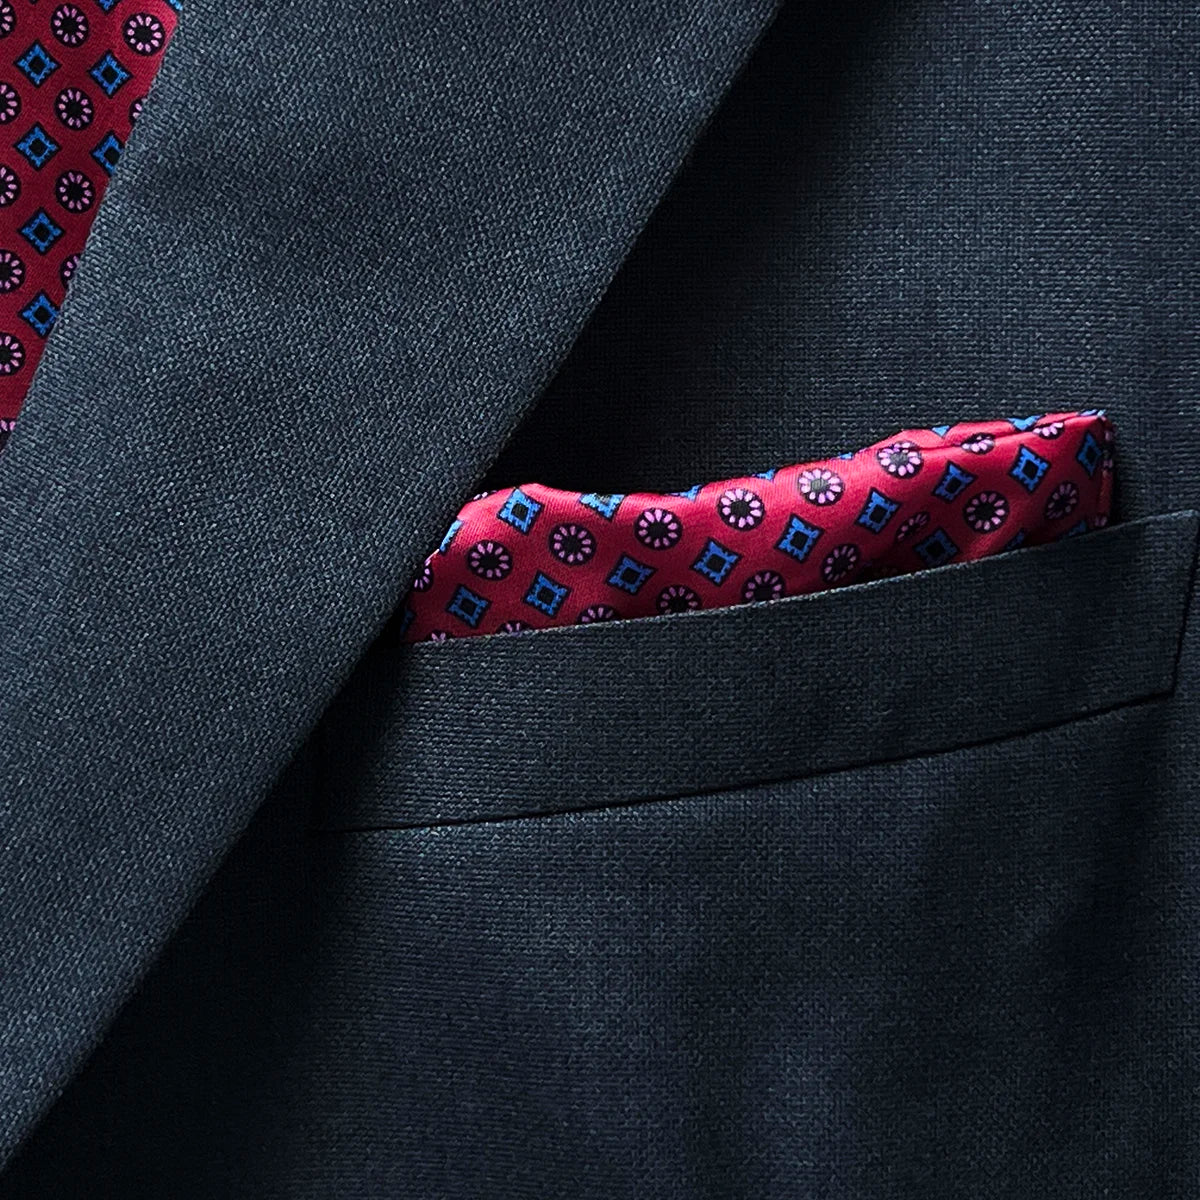 Pocket square in a charcoal grey suit jacket